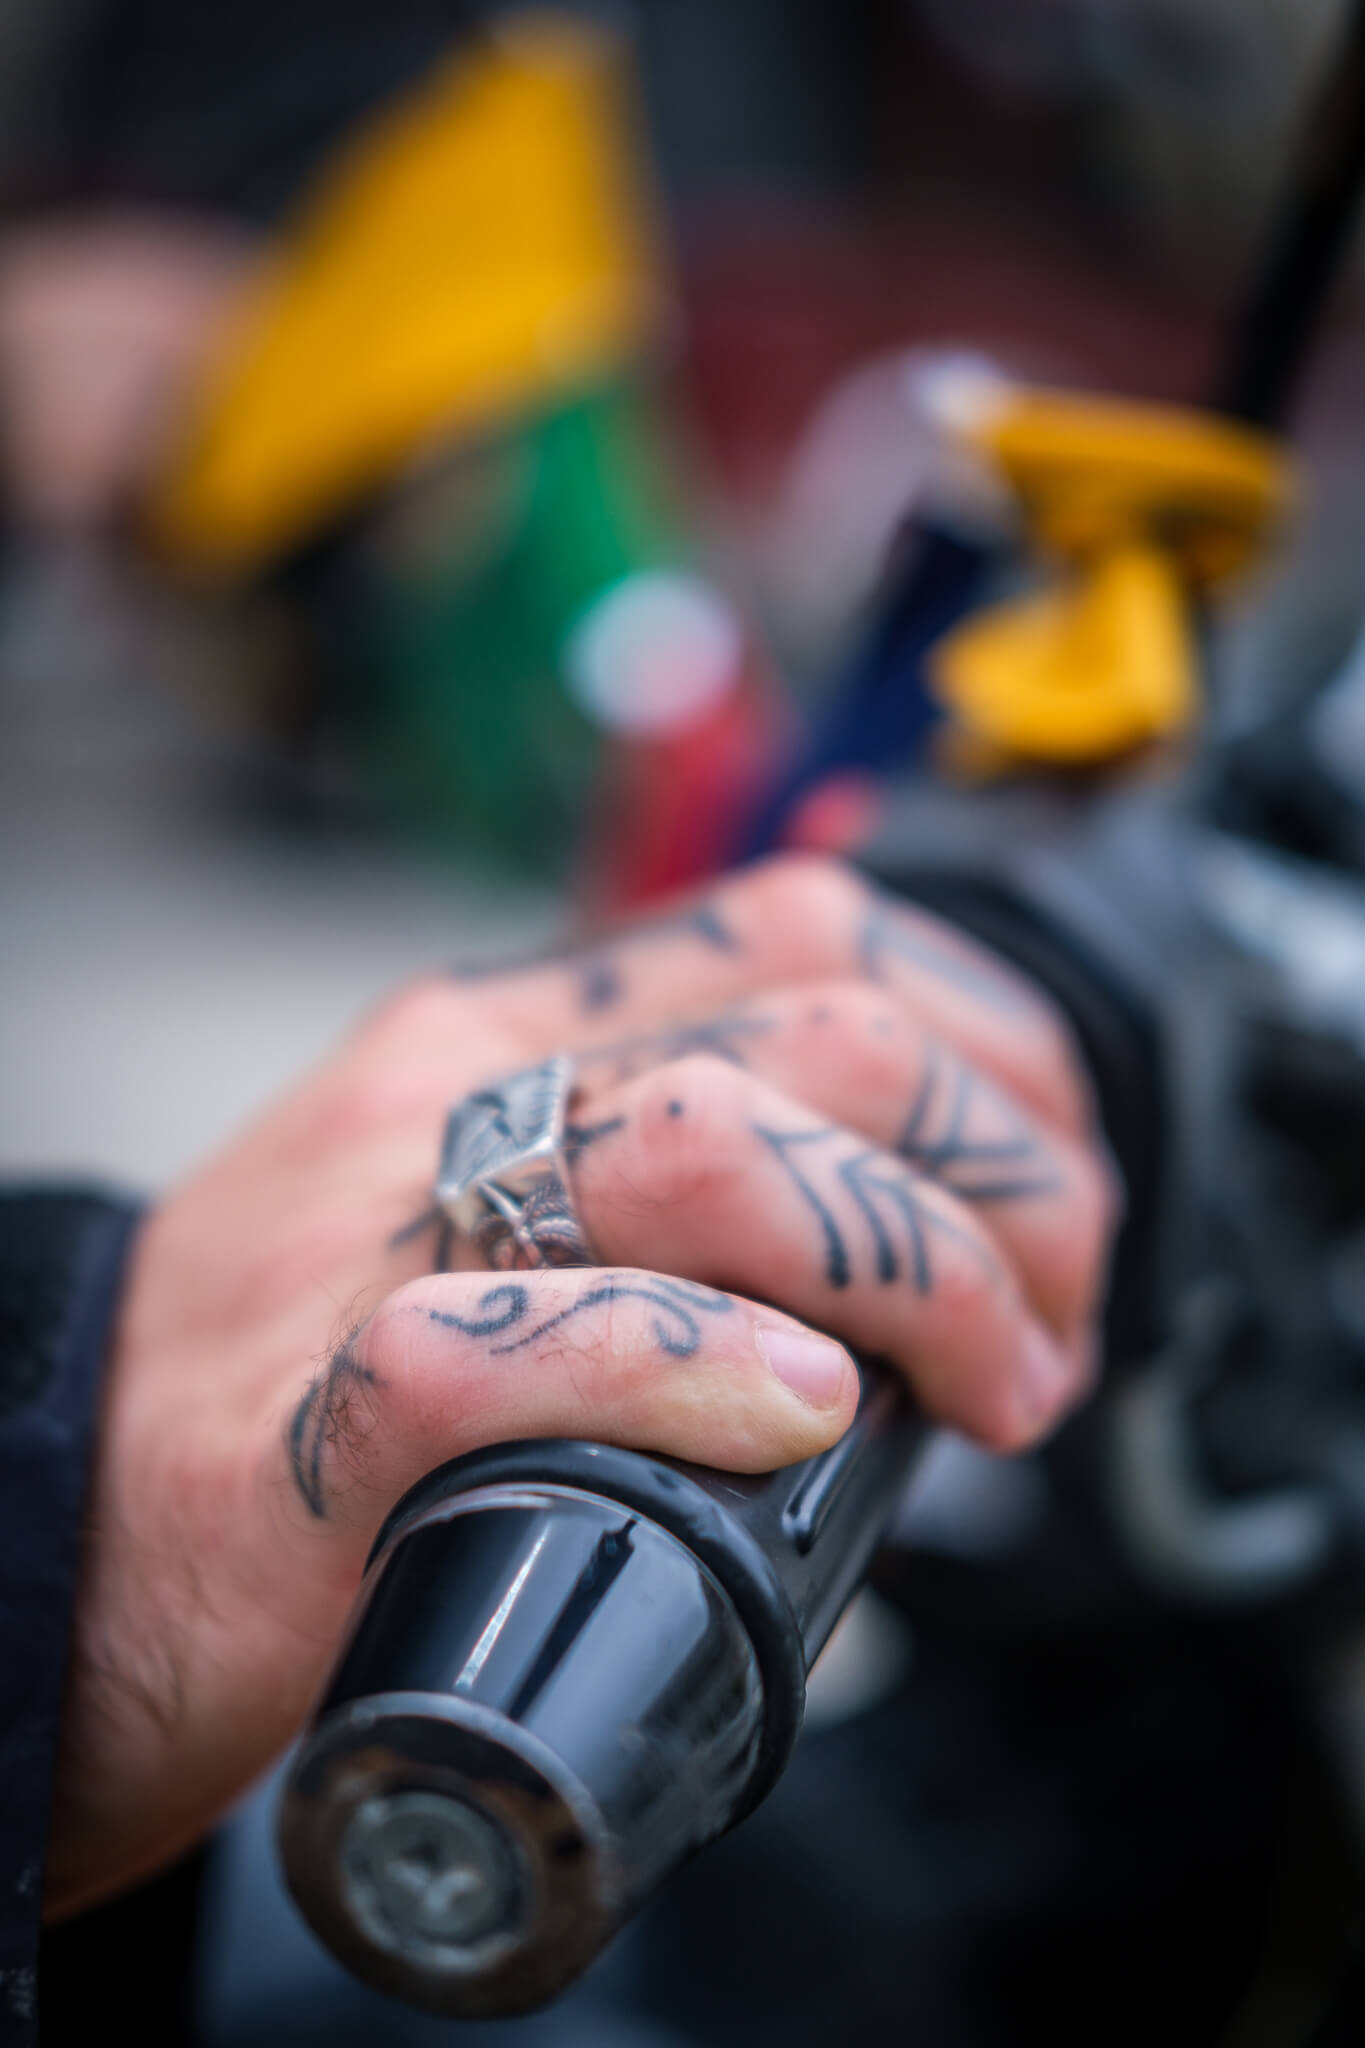 will's tattoed fingers gripping the handlebar of a motorbike in pakistan